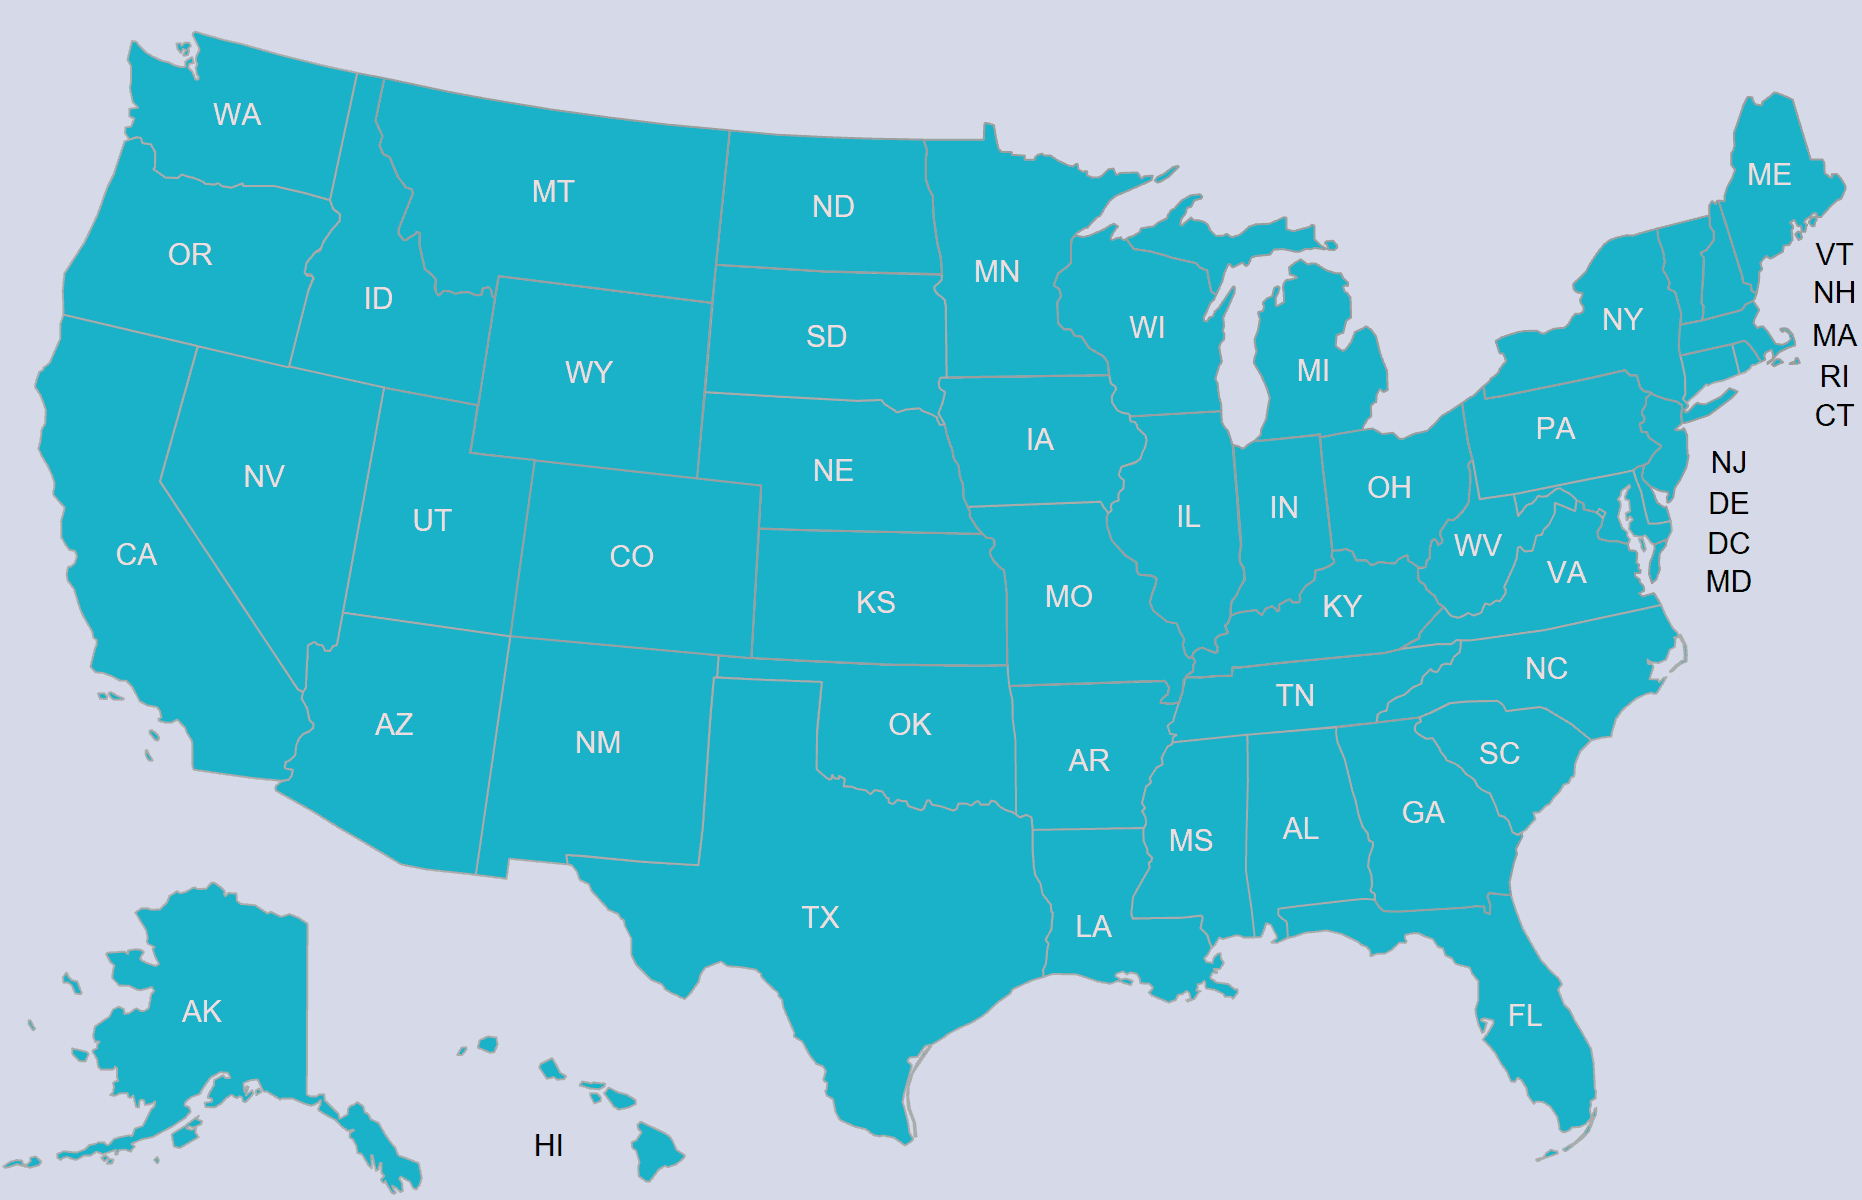 US Public Universities by State